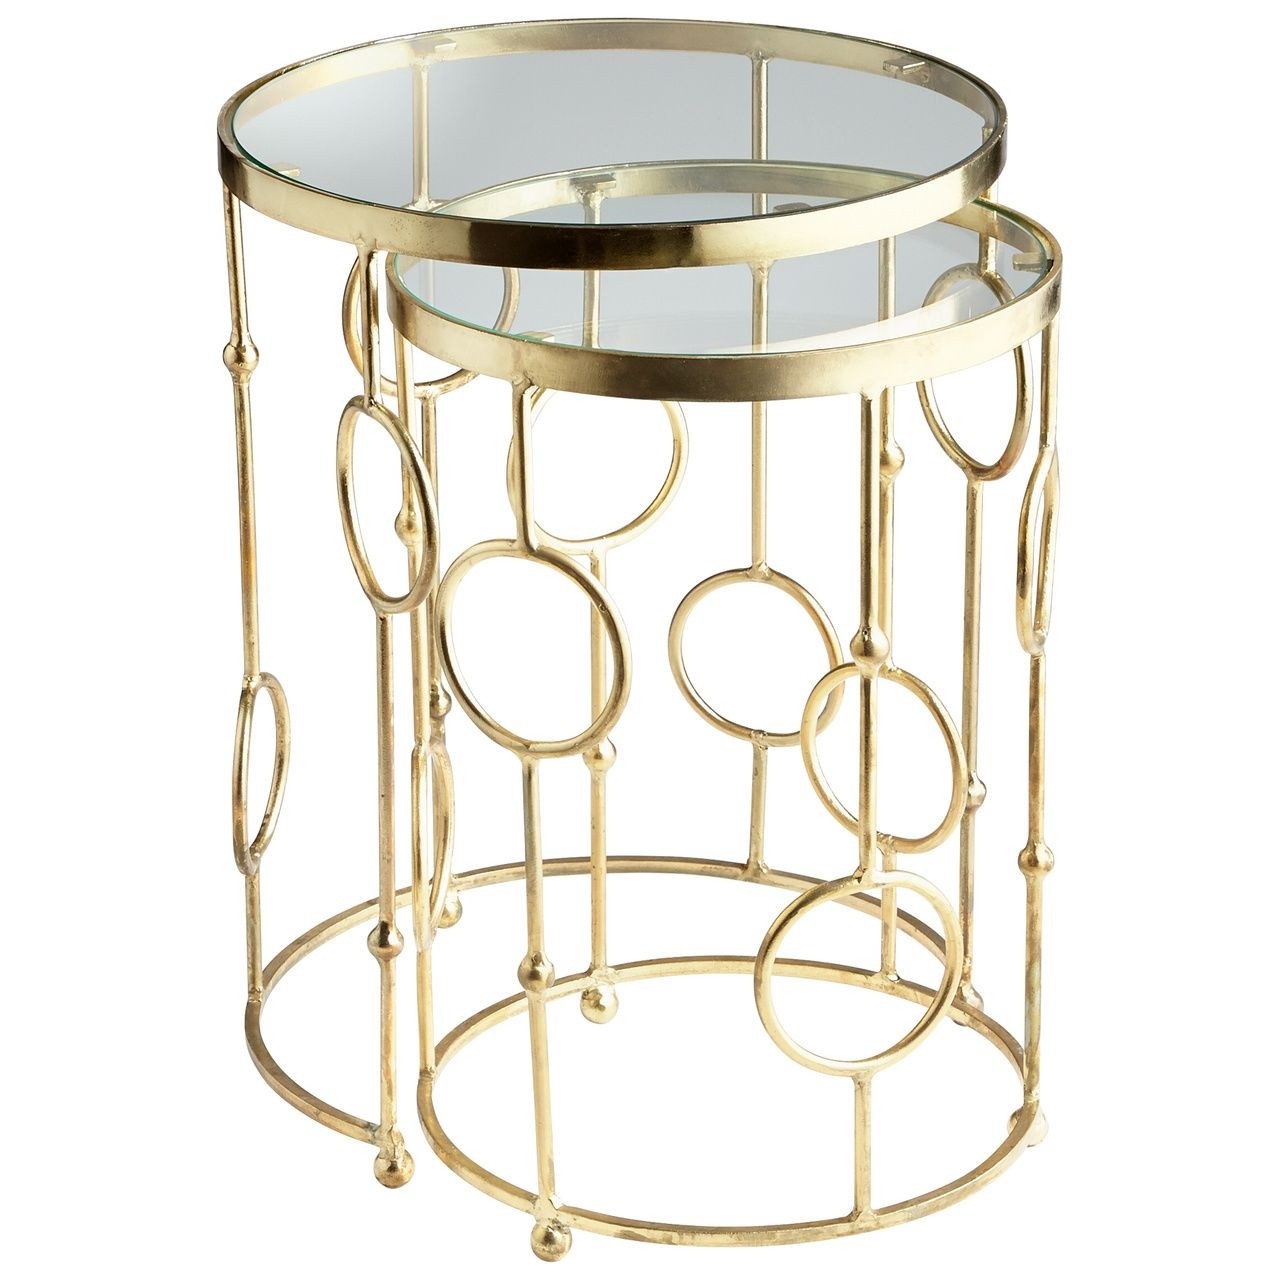 Perseus iron glass gold round nesting tables set of 2